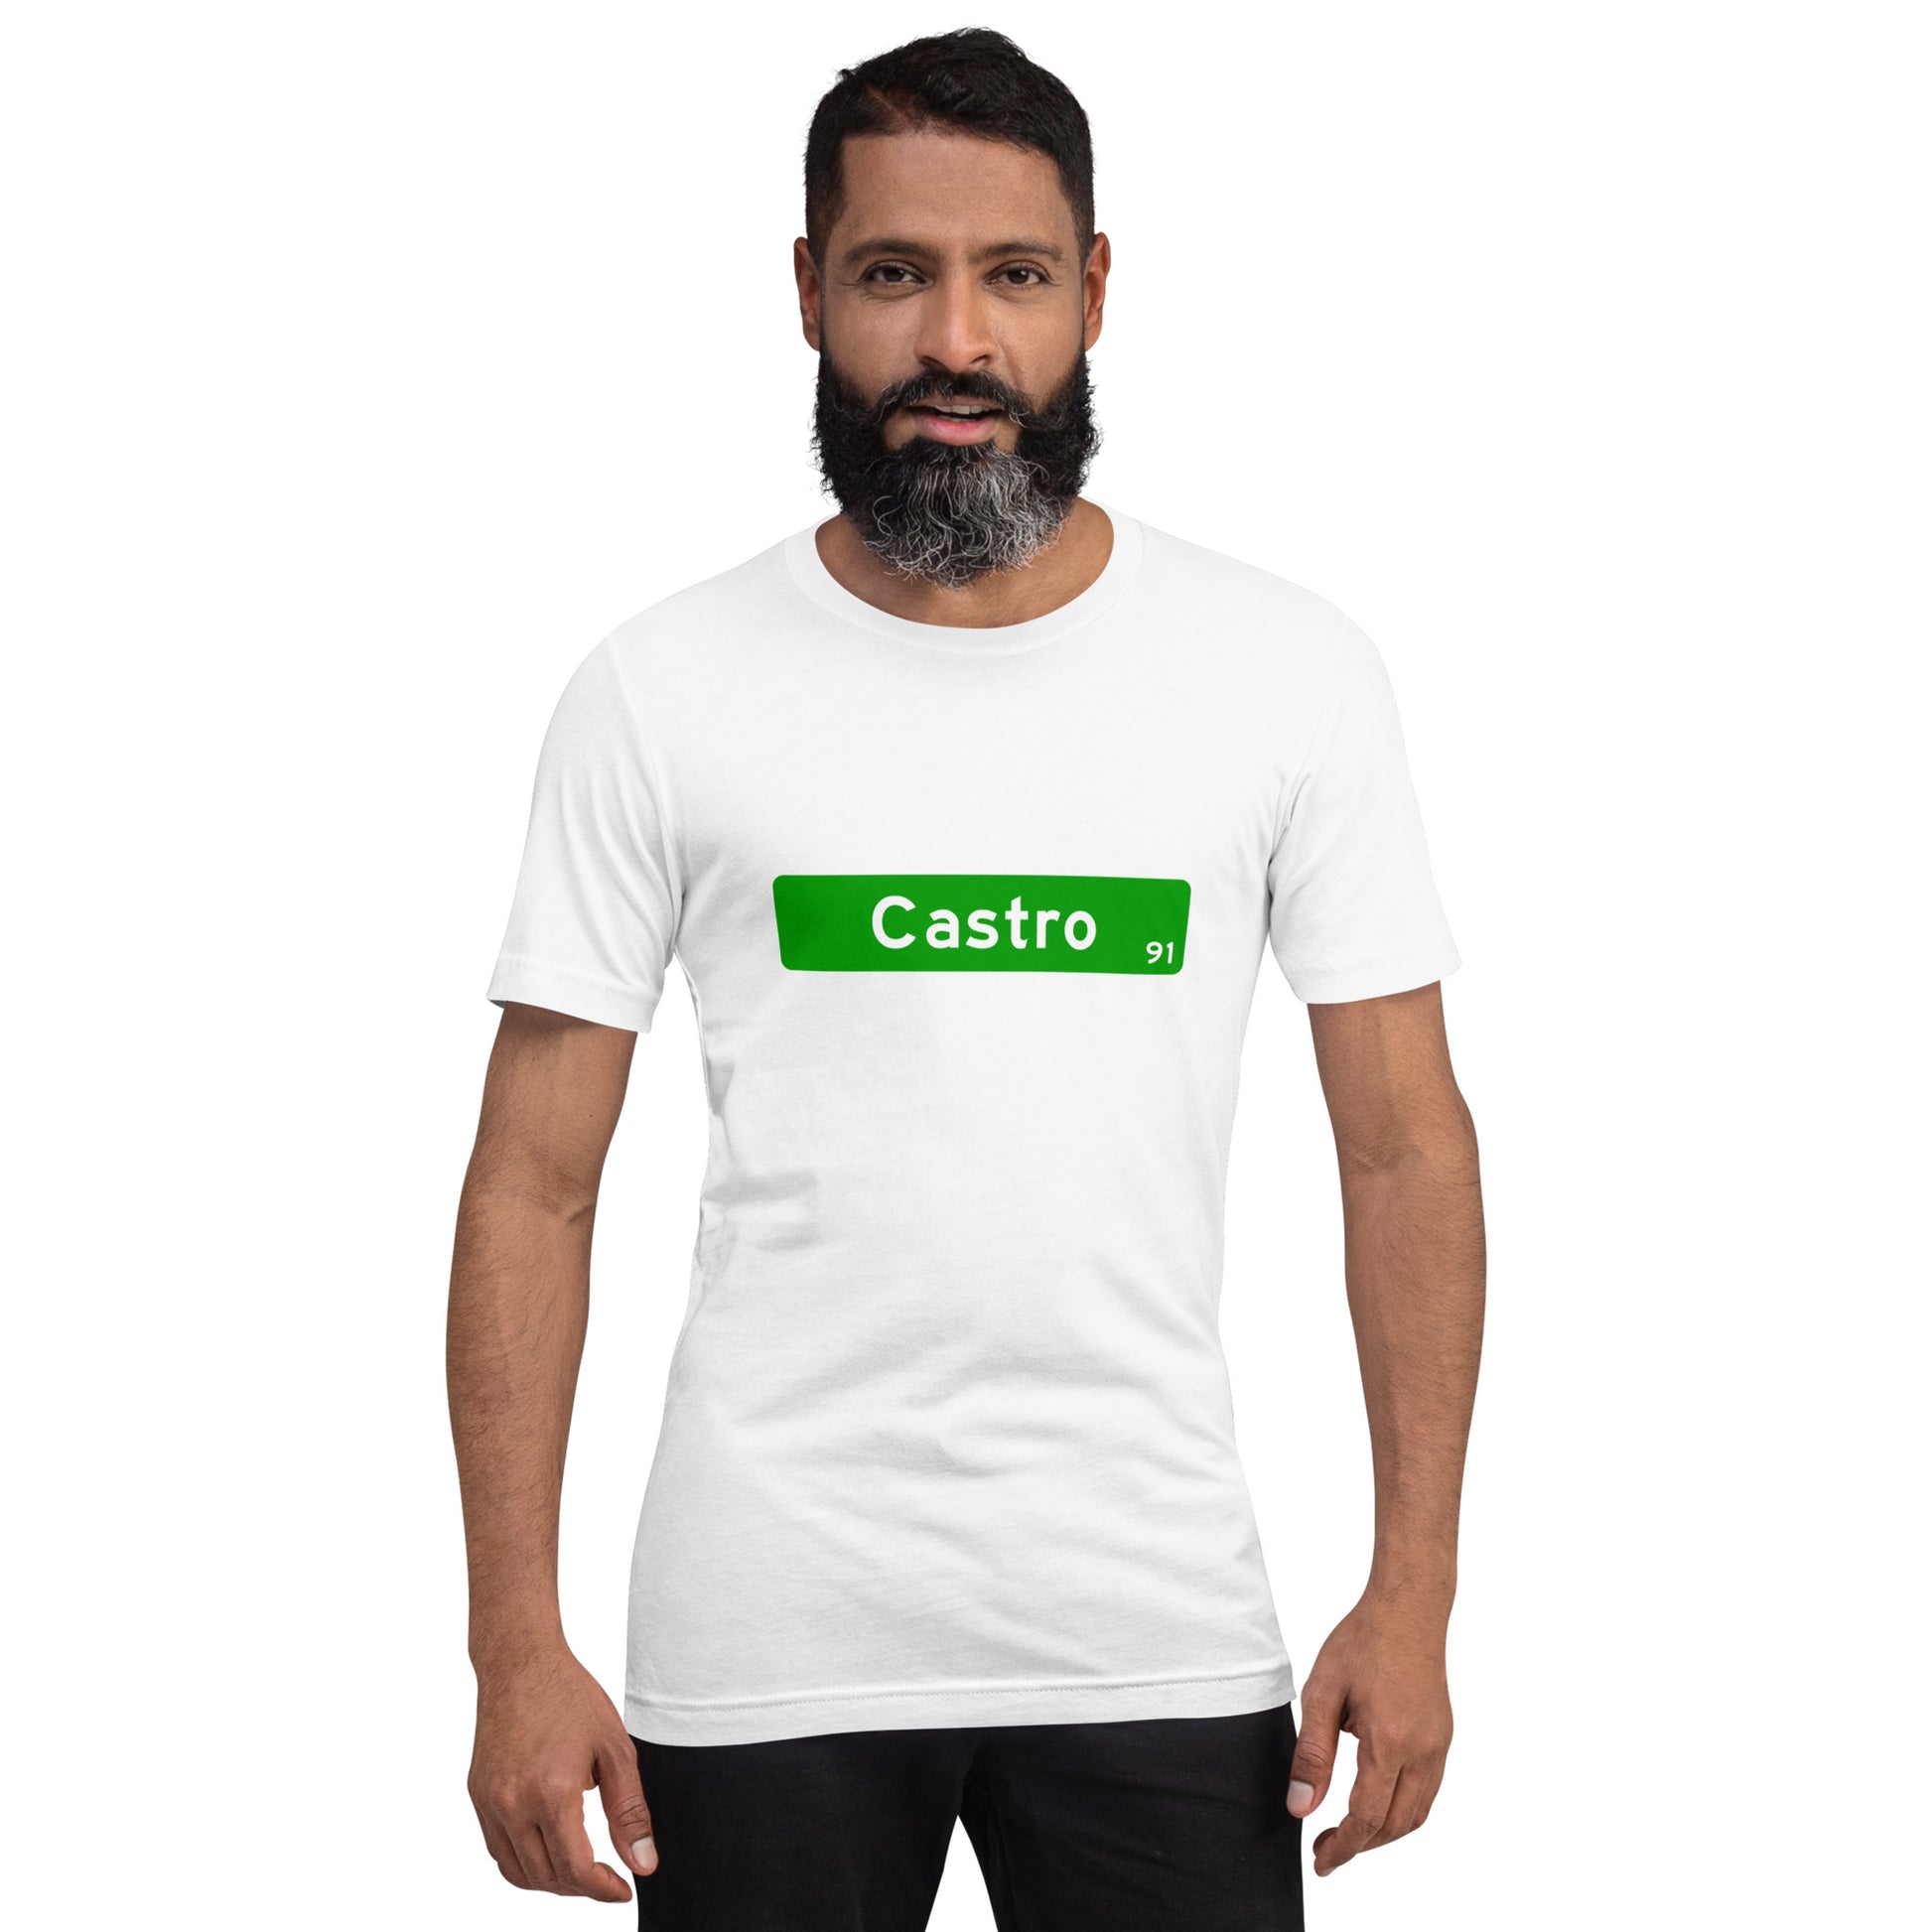 Castro Street T-Shirts for Sale